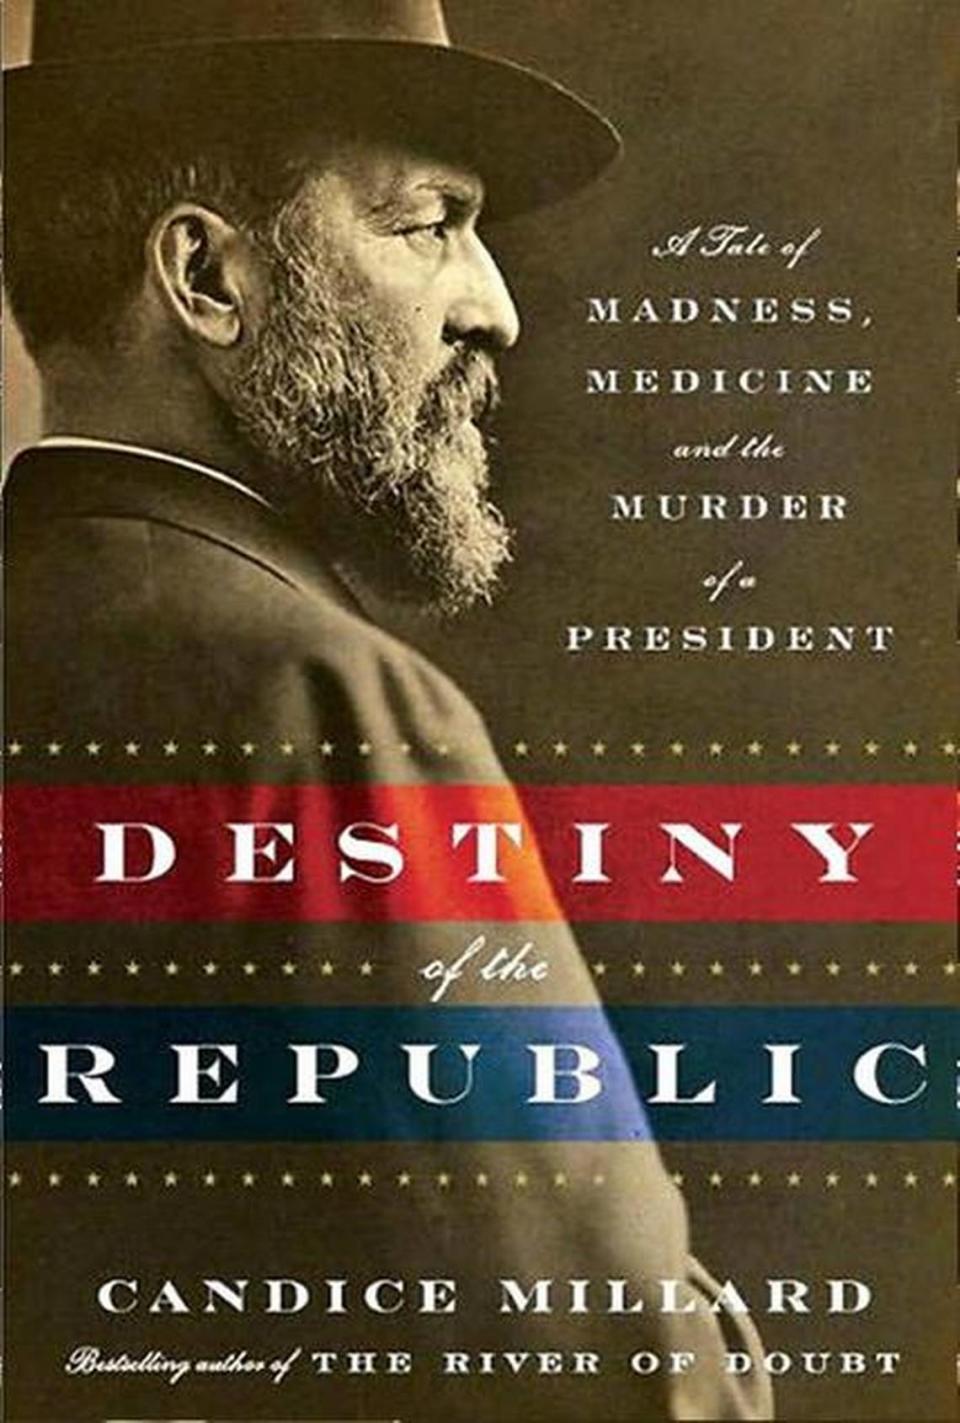 Destiny of the Republic: A Tale of Madness, Medicine and the Murder of a President, published in 2011, was the second of Candice Millard’s four books.